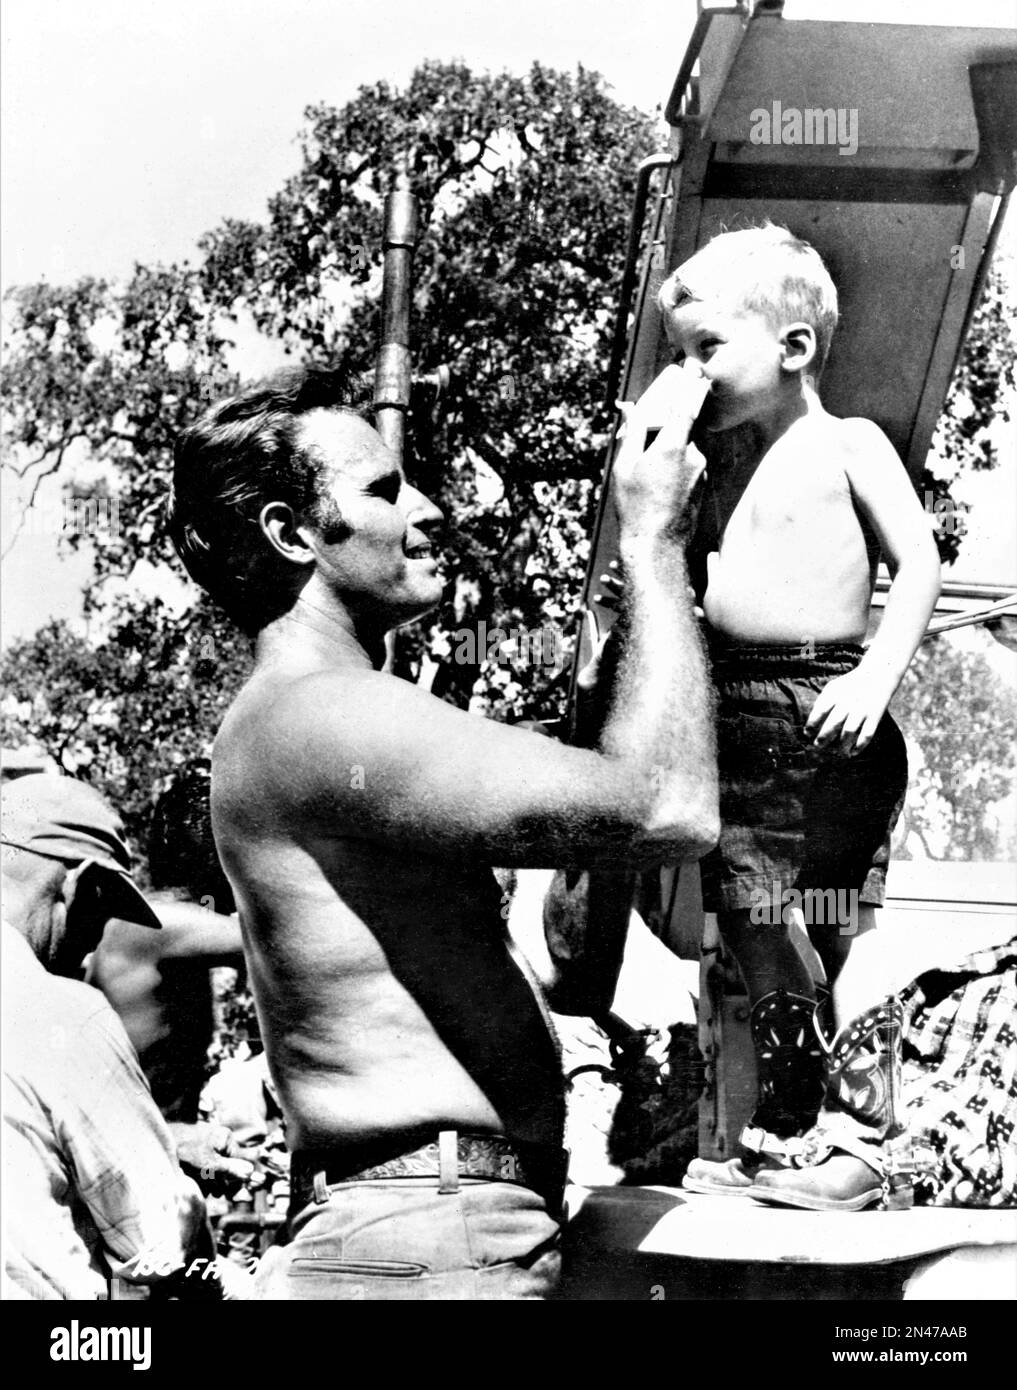 CHARLTON HESTON and his son FRASER HESTON on set location candid during filming of THE BIG COUNTRY 1958 director WILLIAM WYLER novel Donald Hamilton music Jerome Moross producers Gregory Peck and William Wyler Anthony - Worldwide Productions / United Artists Stock Photo